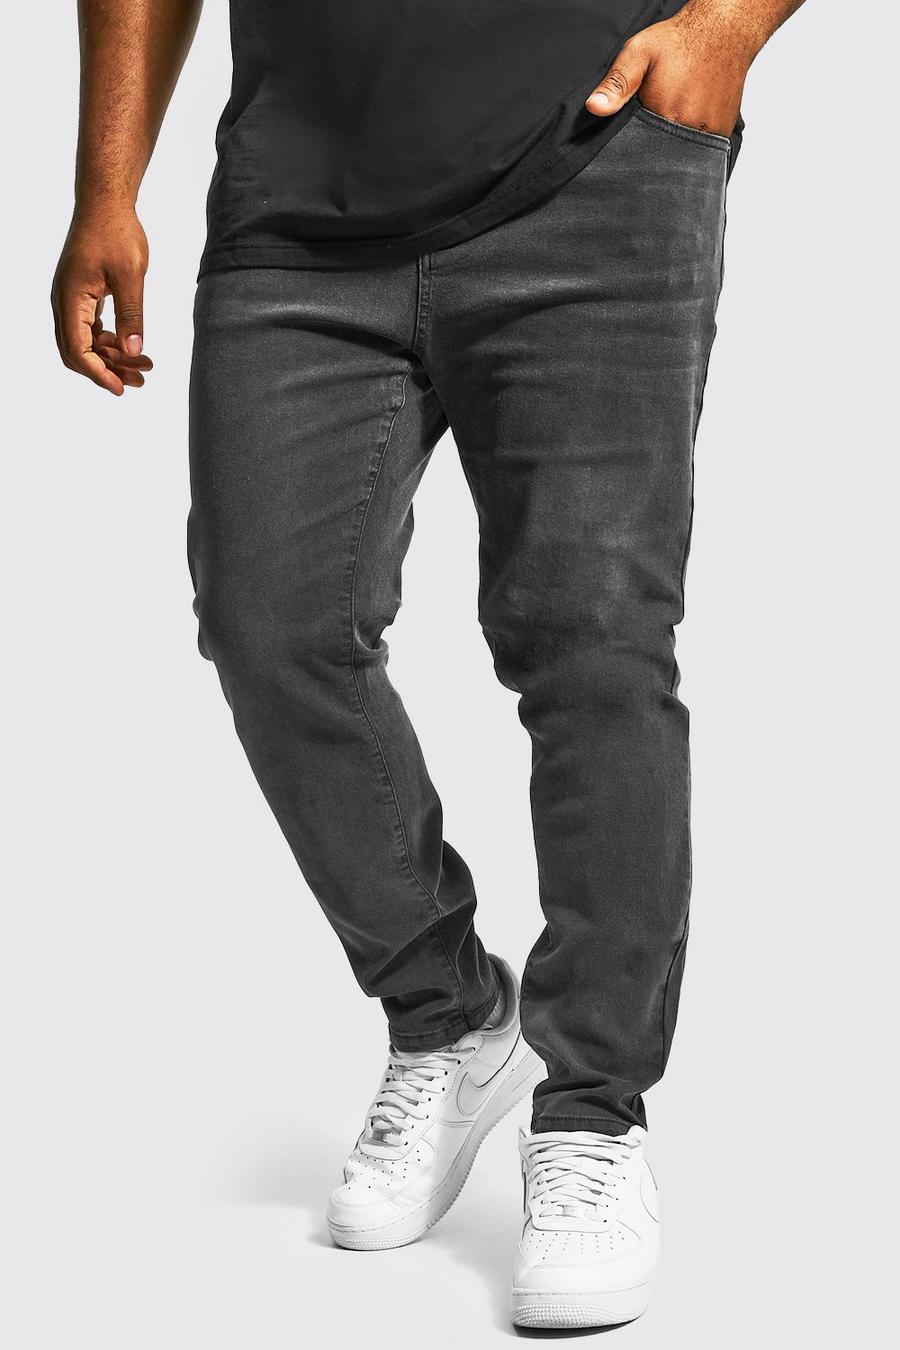 Jeans Plus Size Skinny Fit in Stretch in poliestere riciclato, Charcoal grey